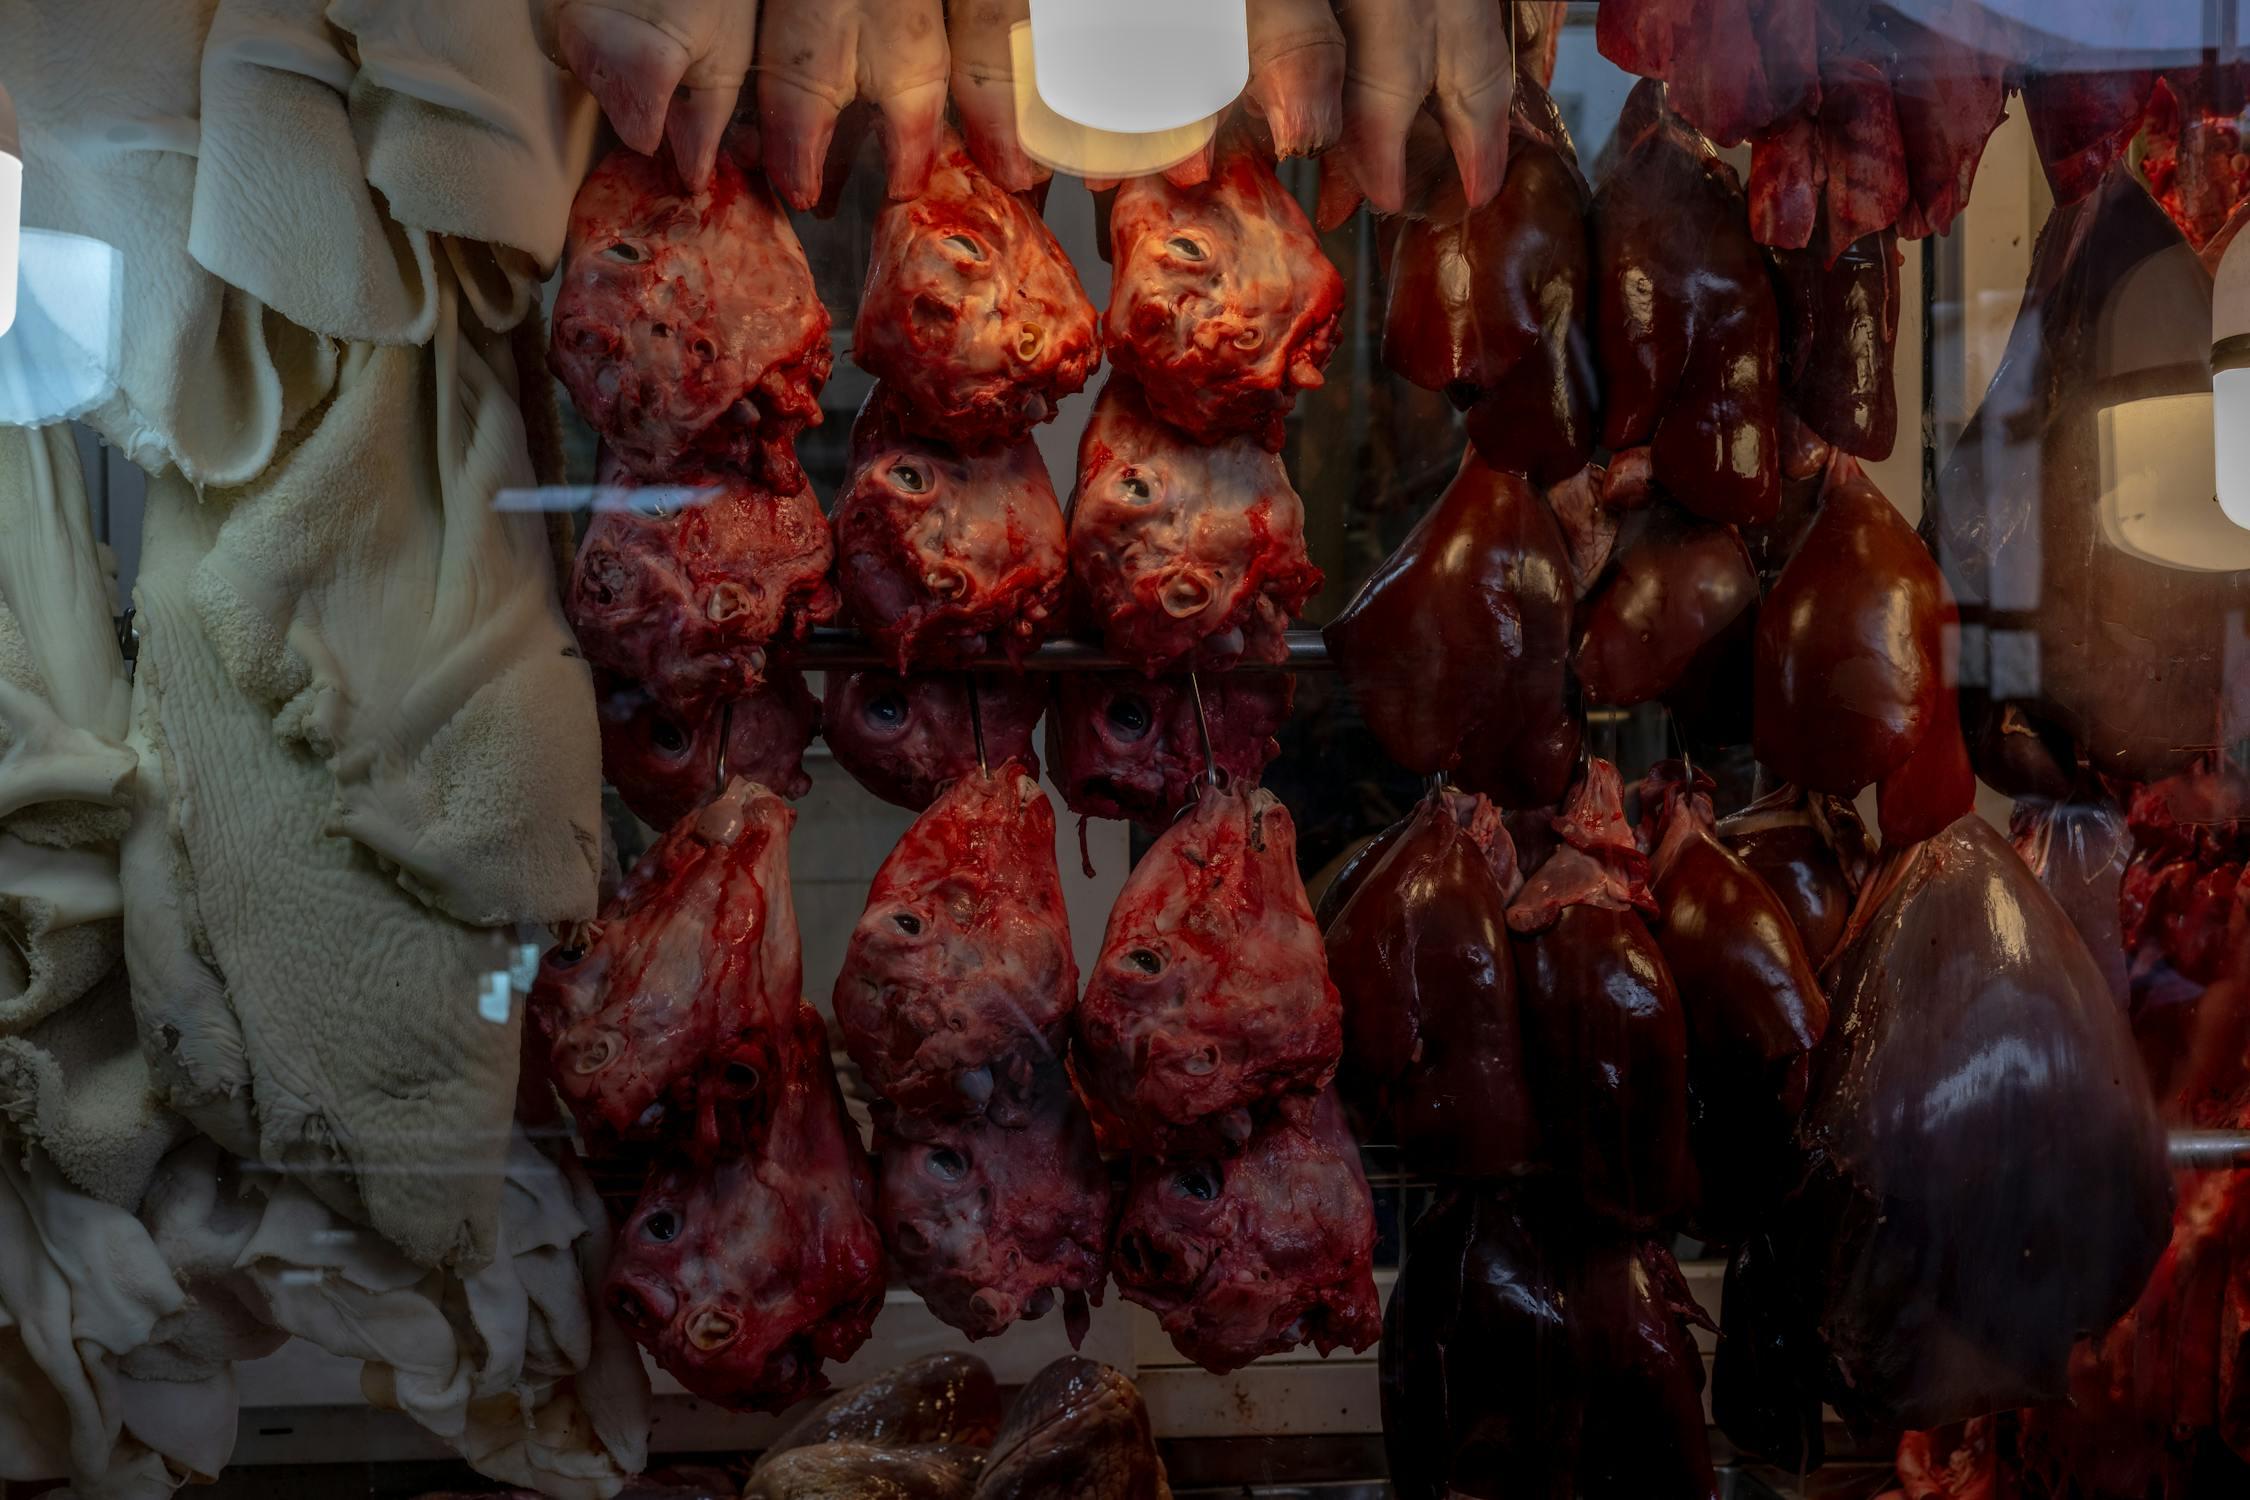 A butcher shop with meat hanging on hooks